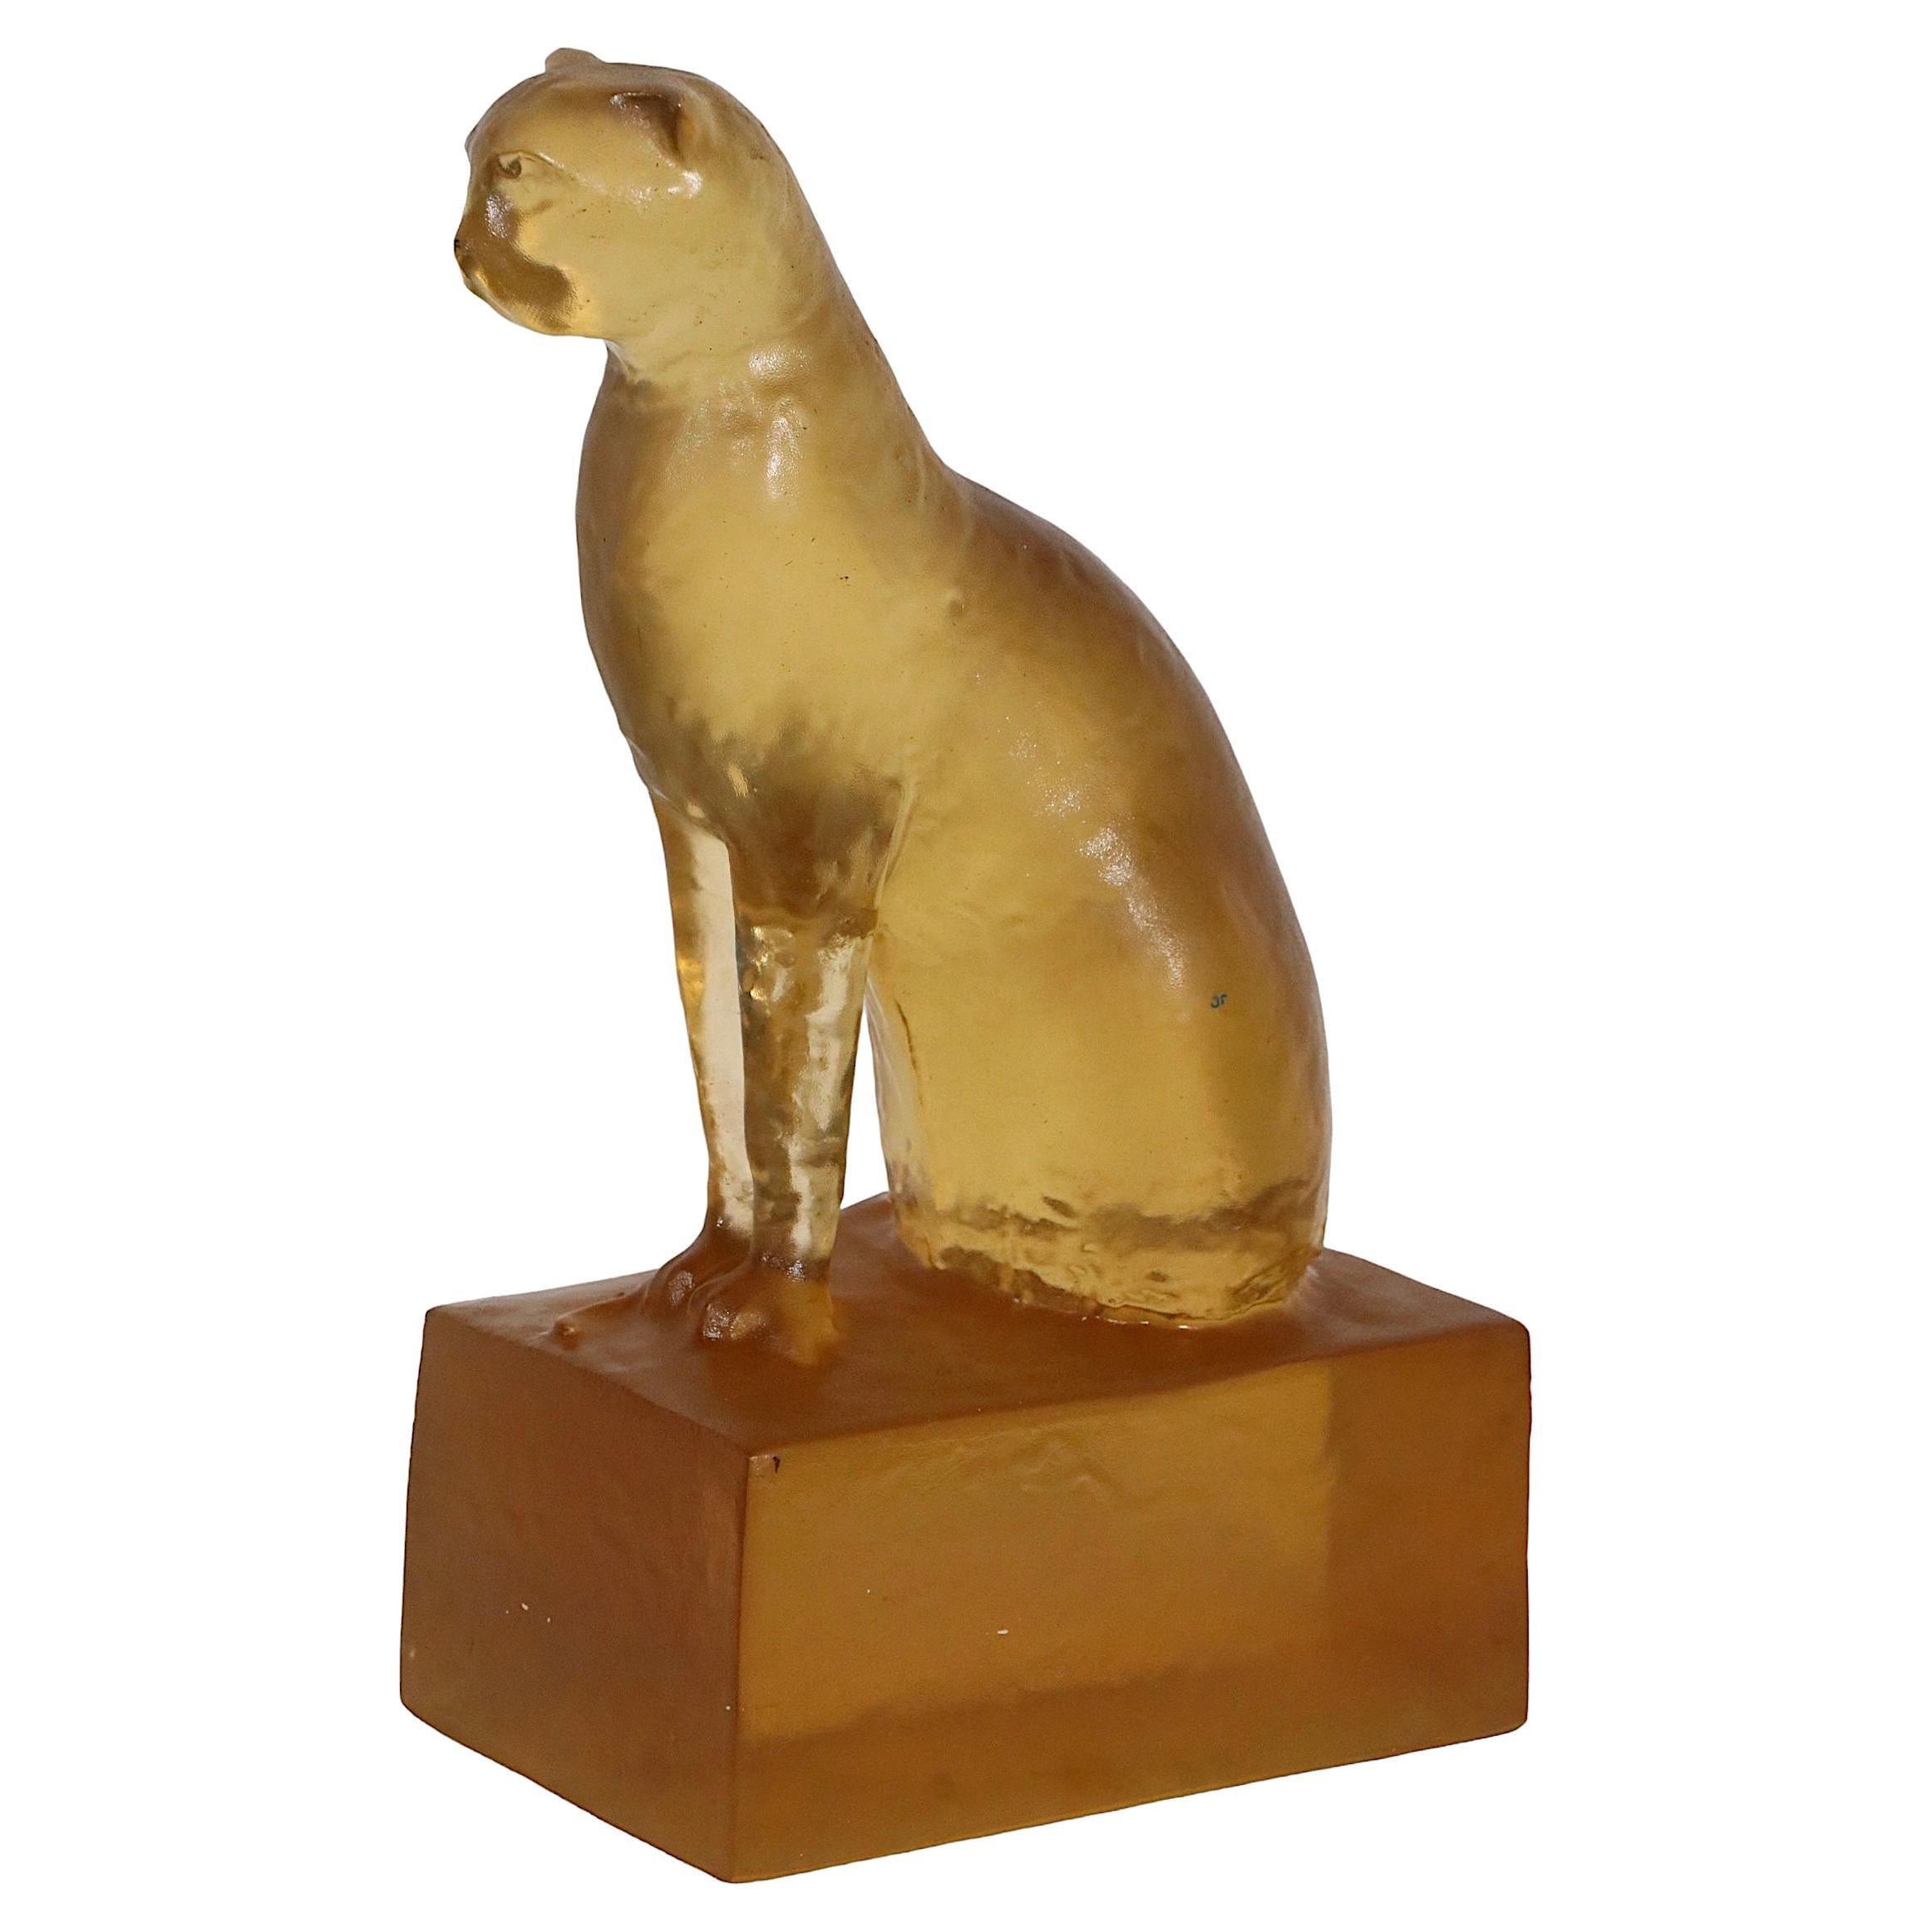 Chic 1940's cat sculpture in translucent yellow tone lucite, by design immortal Dorothy Thorpe.